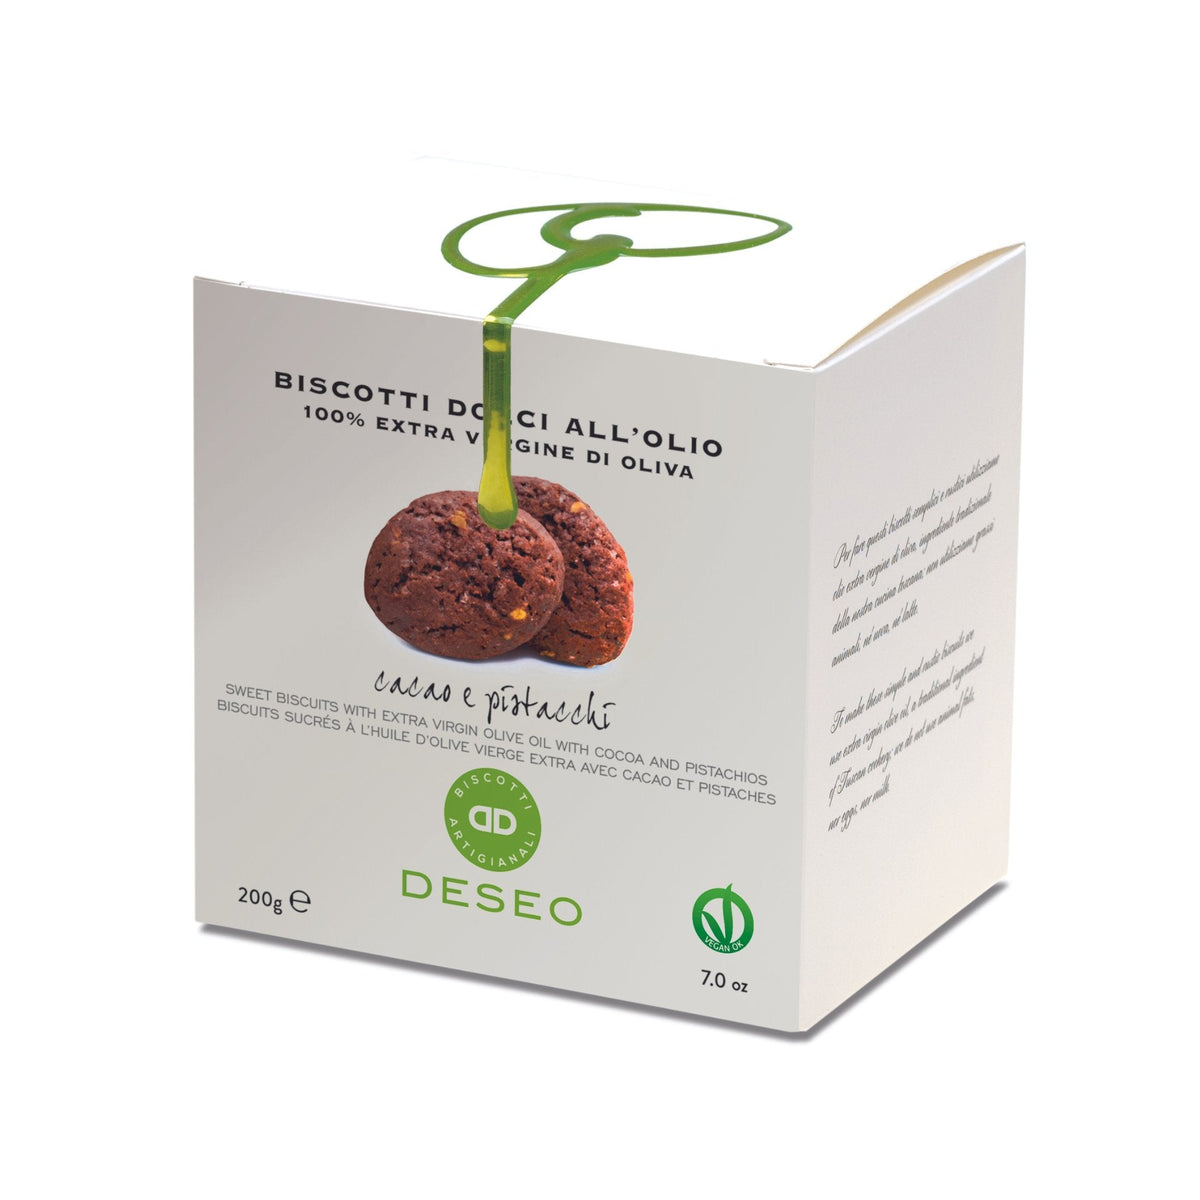 Deseo Sweet Biscuits with Cocoa, Pistachio &amp; Extra Virgin Olive Oil 200g (Box)  | Imported and distributed in the UK by Just Gourmet Foods